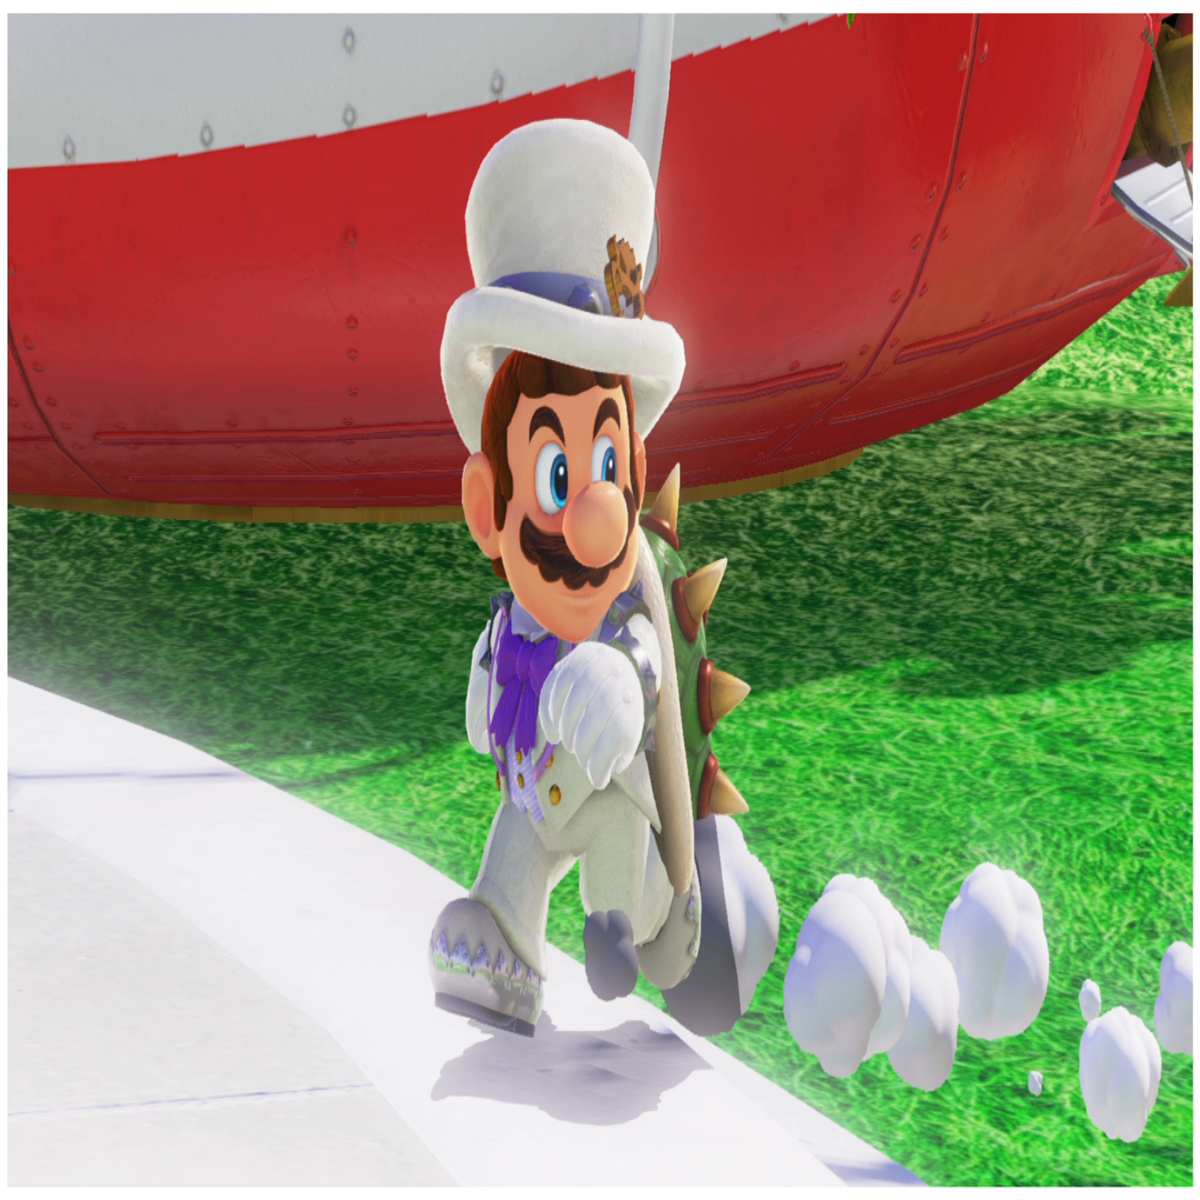 Super Mario Odyssey Outfits list - outfit prices and how to unlock every  costume, outfit and suit in Super Mario Odyssey